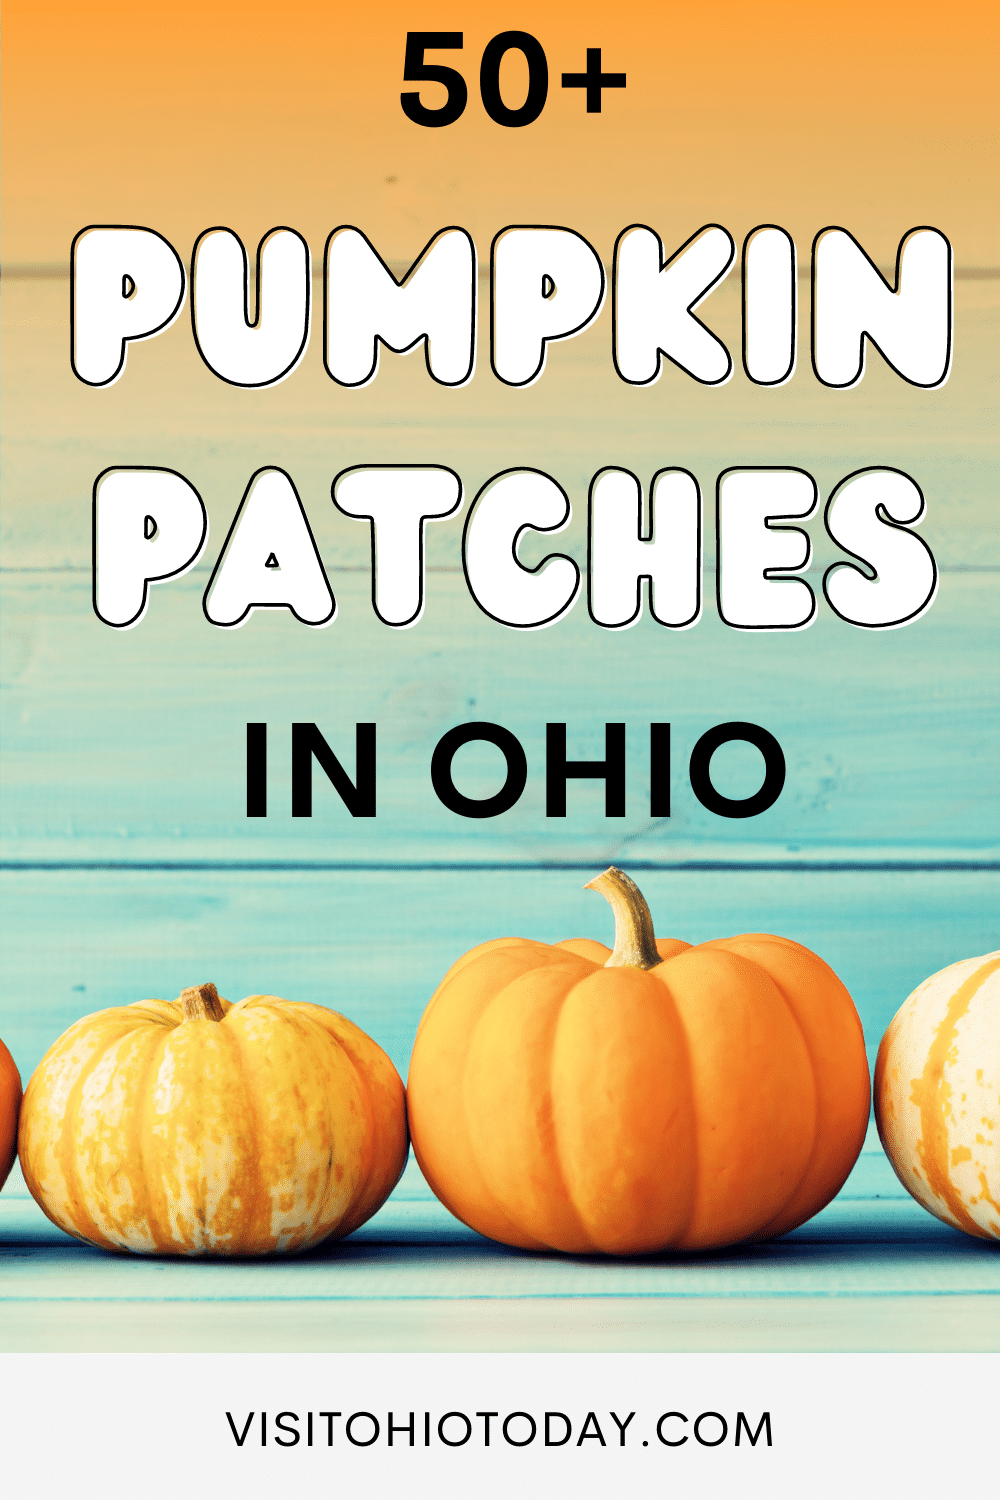 Looking for the perfect pumpkin patch near you to visit this weekend in Ohio? We've got you covered with the best pumpkin patches in Ohio! | Pumpkin Patches In Ohio | Ohio Adventures | Ohio Pumpkins | Ohio Pumpkin Patches